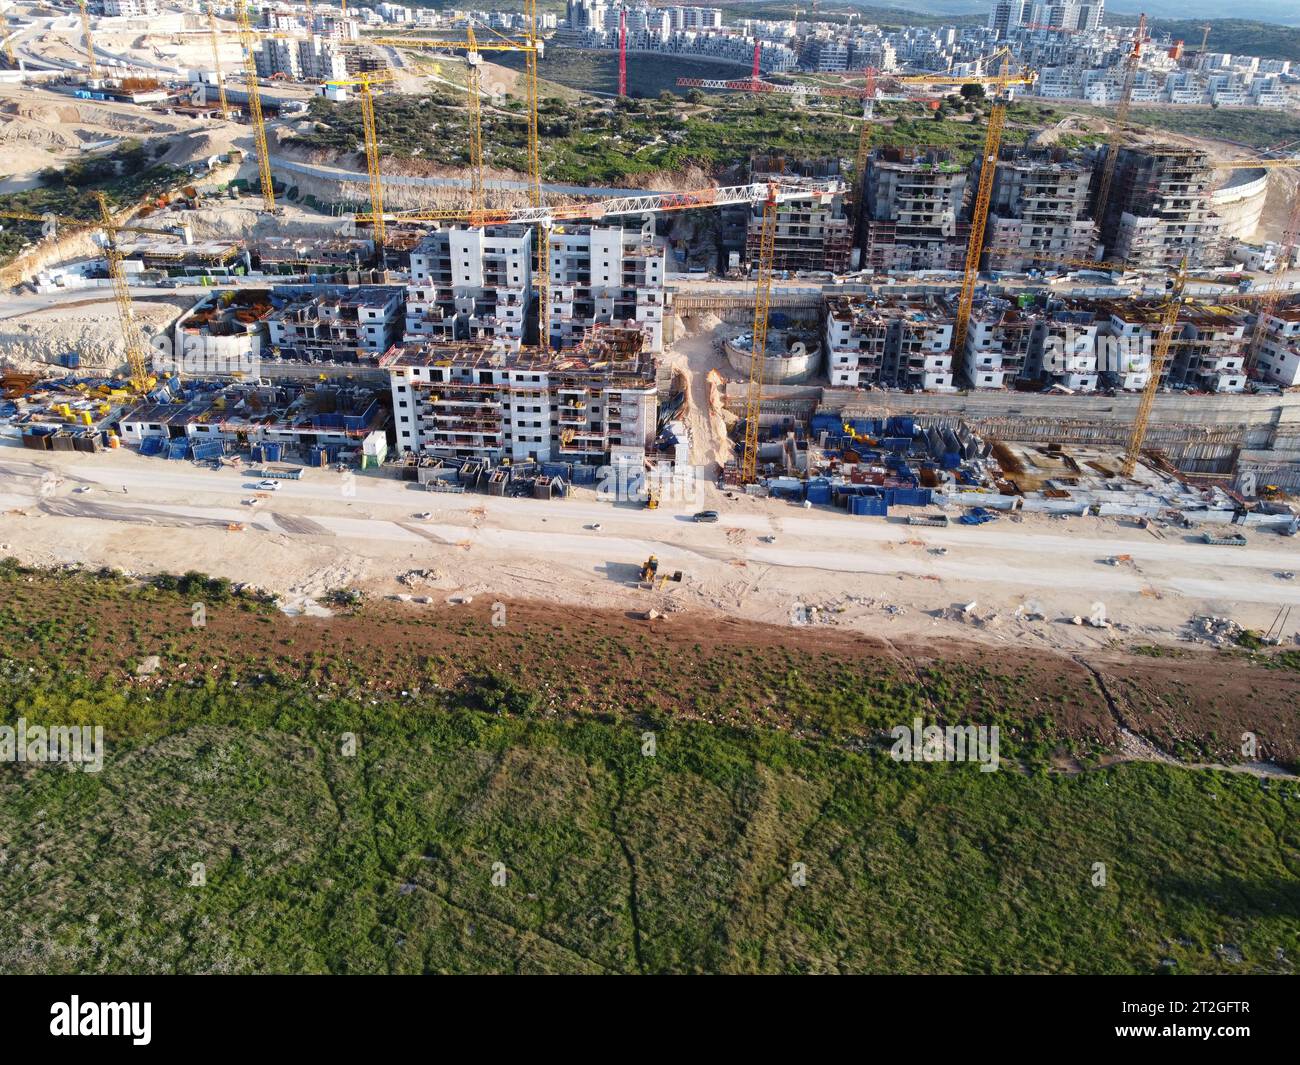 Construction site in Modiin, Israel aerial footage. Stock Photo